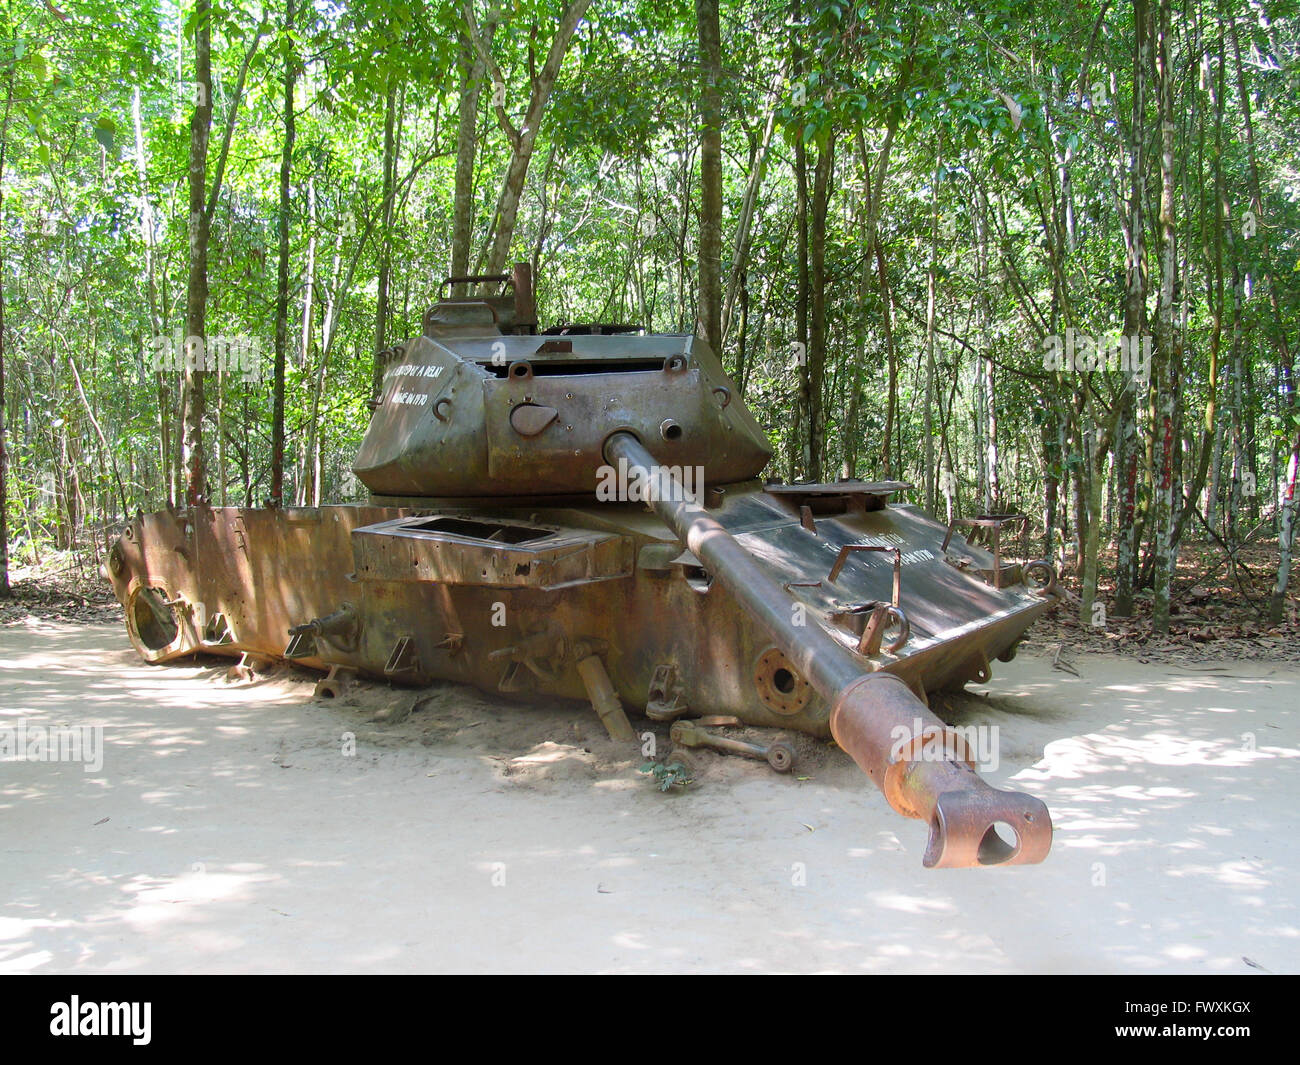 An American tank, a remnant from the Vietnam War, on display at  Củ Chi, Ho Chi Minh City, Vietnam. Stock Photo